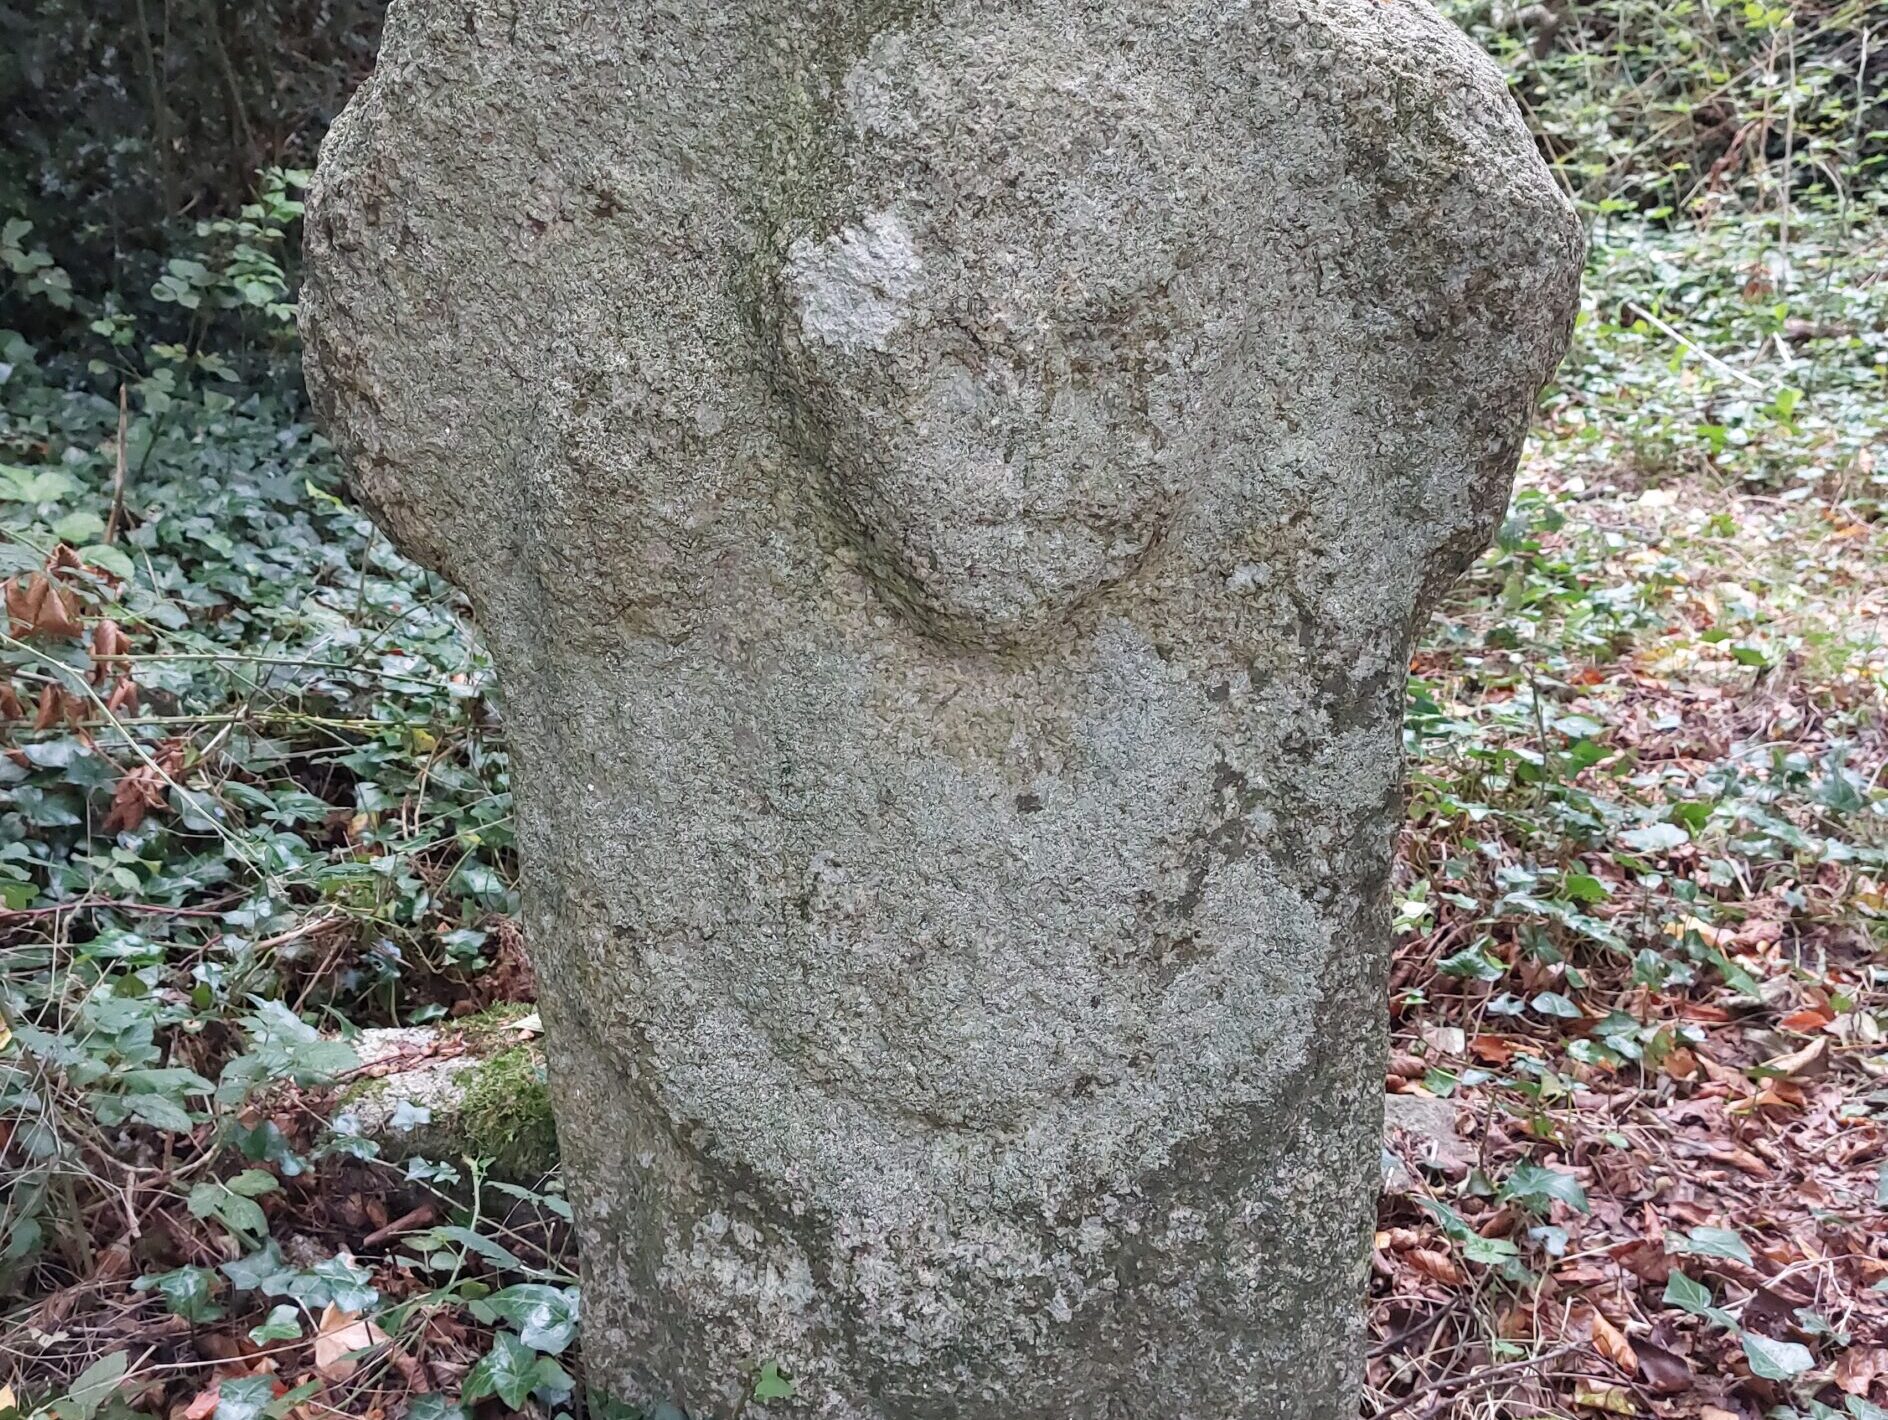 A stone figure on a cross-shaped grave marker, thought to be a Sheela na Gig but more likely a later decorative feature